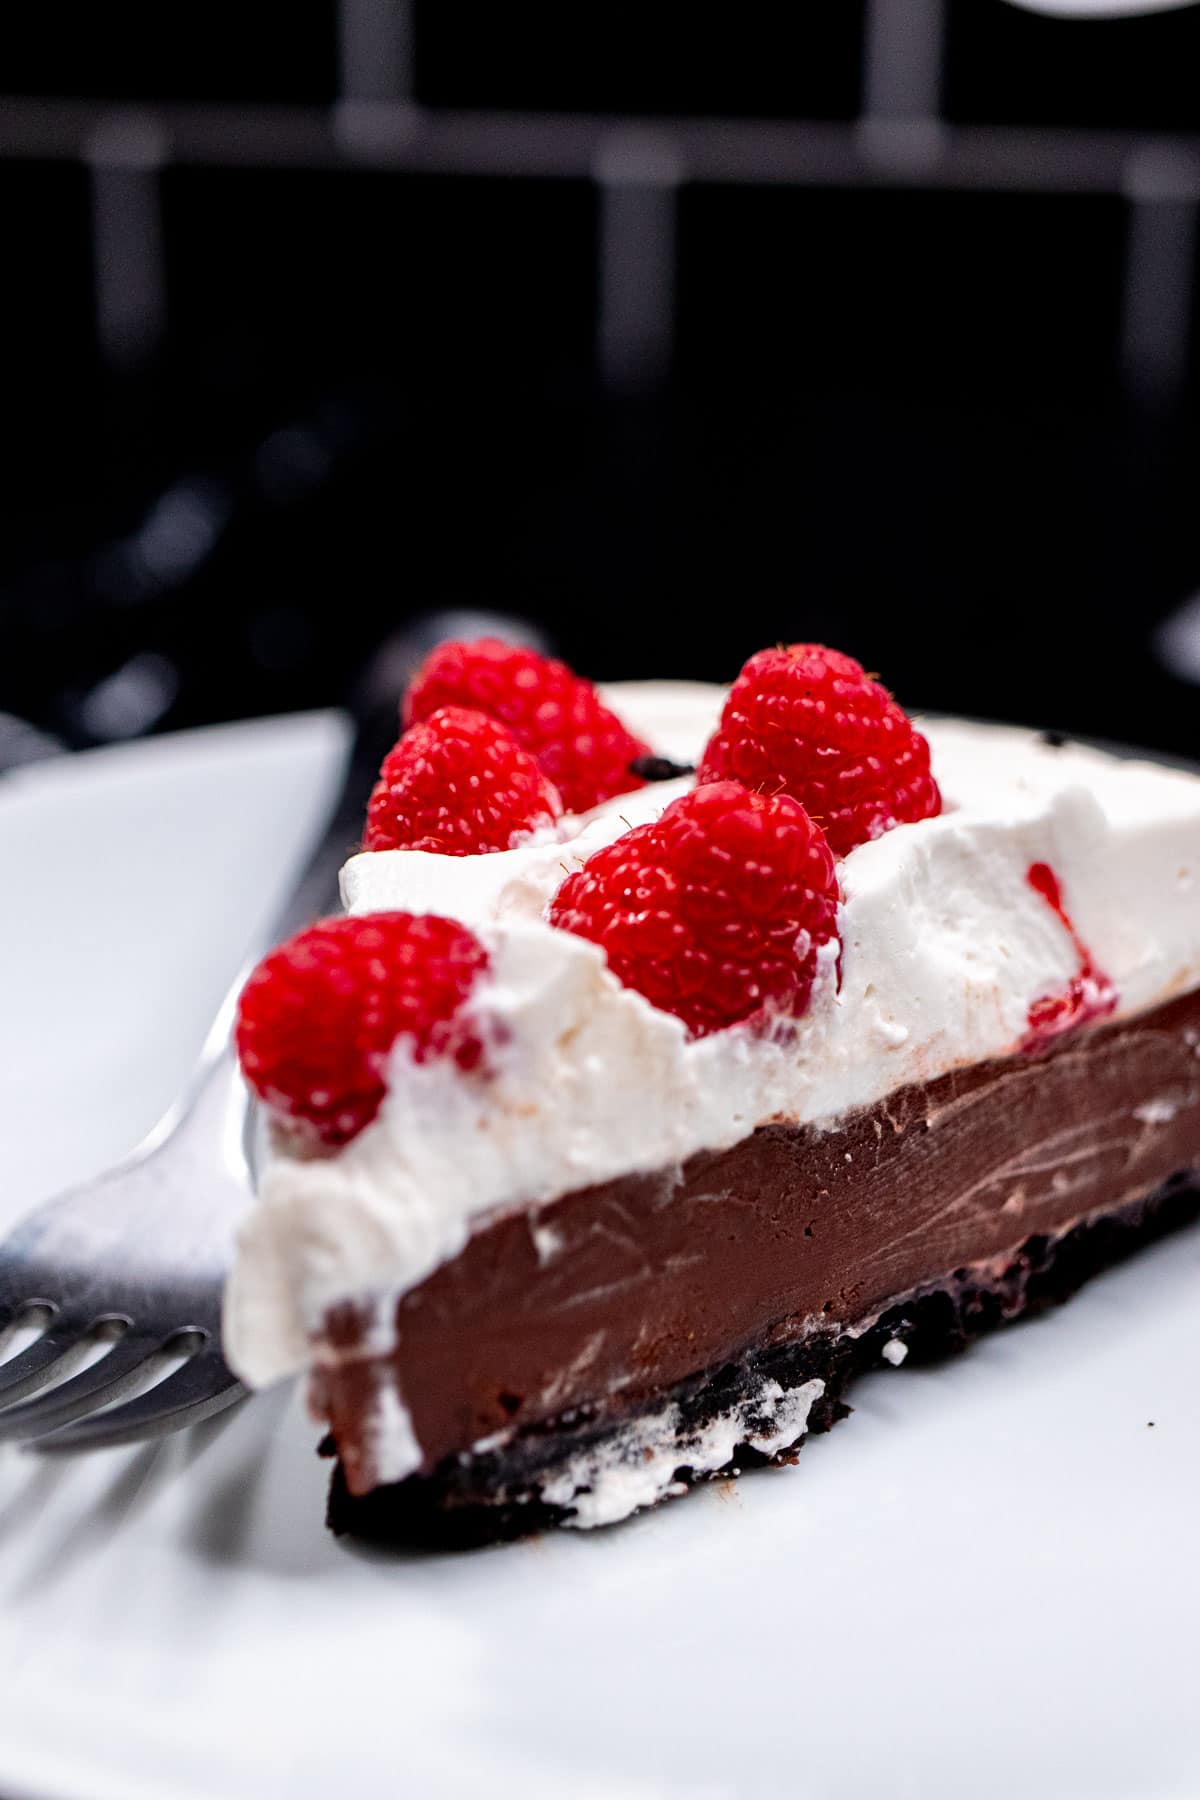 A slice of chocolate raspberry pie topped with whipped cream and fresh raspberries on a plate.